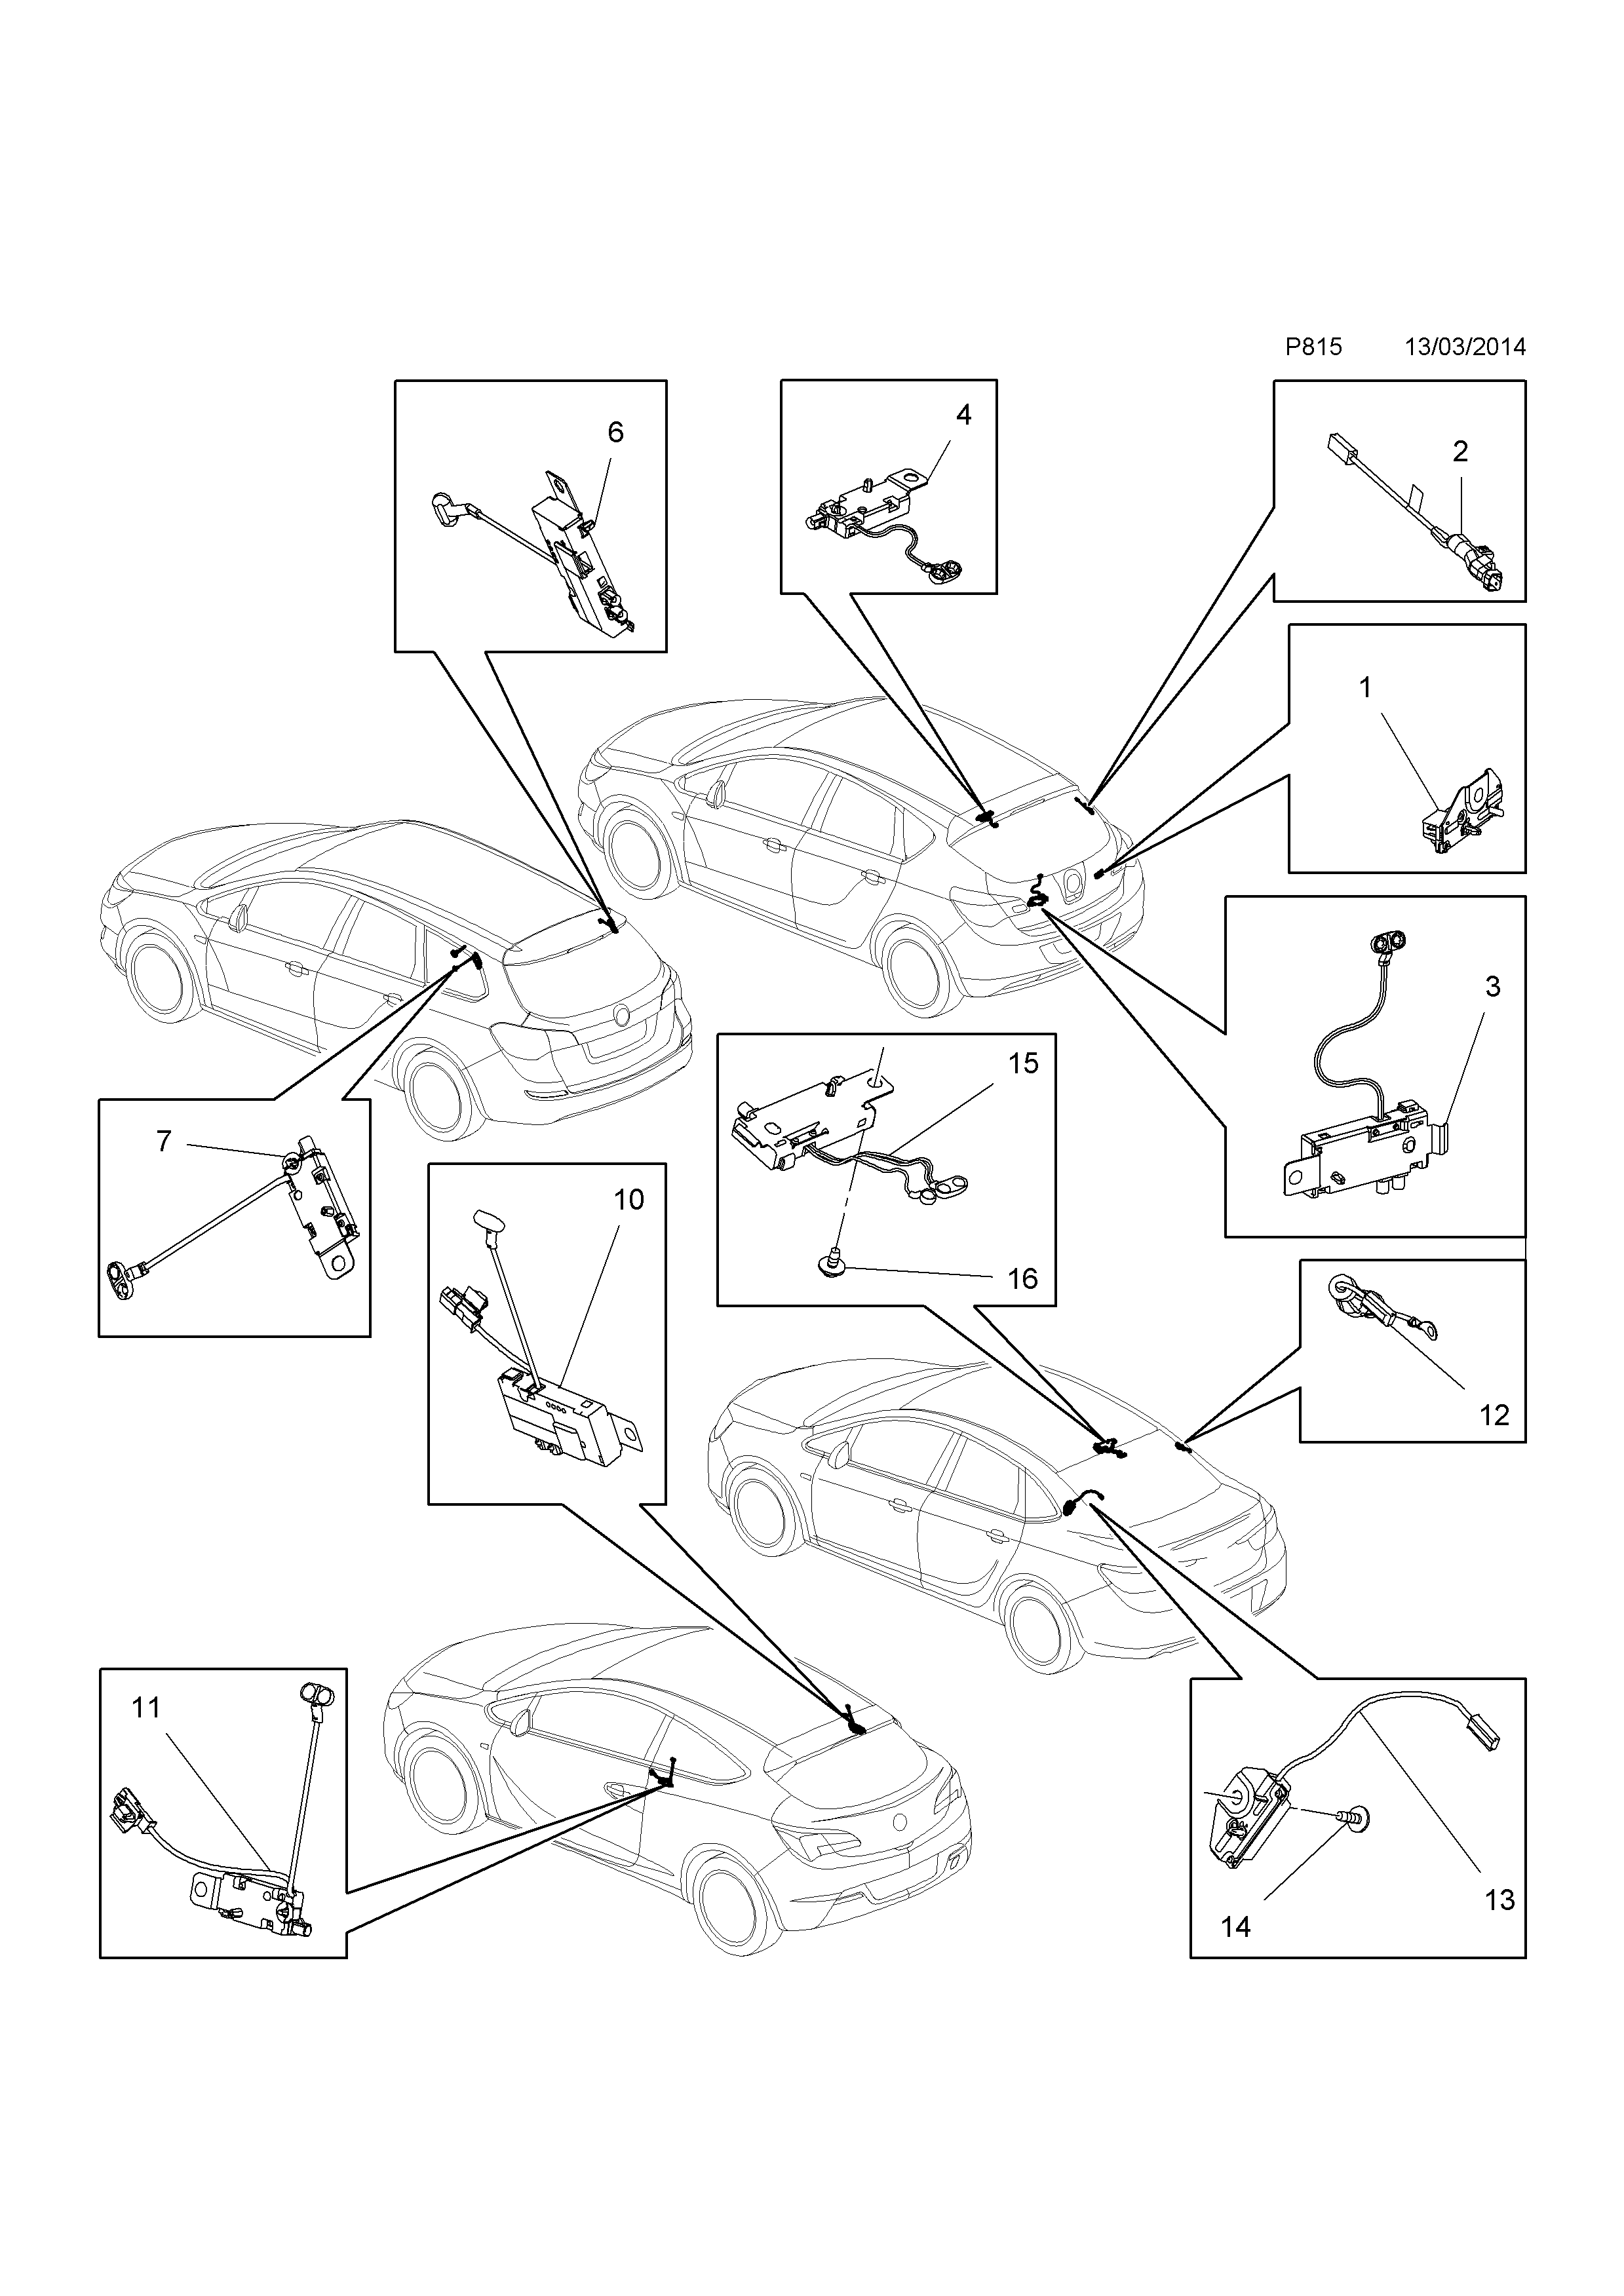 AERIAL <small><i>[FOR WINDOW DIVERSITY ANTENNA SYSTEM (ESTATE 35)]</i></small>